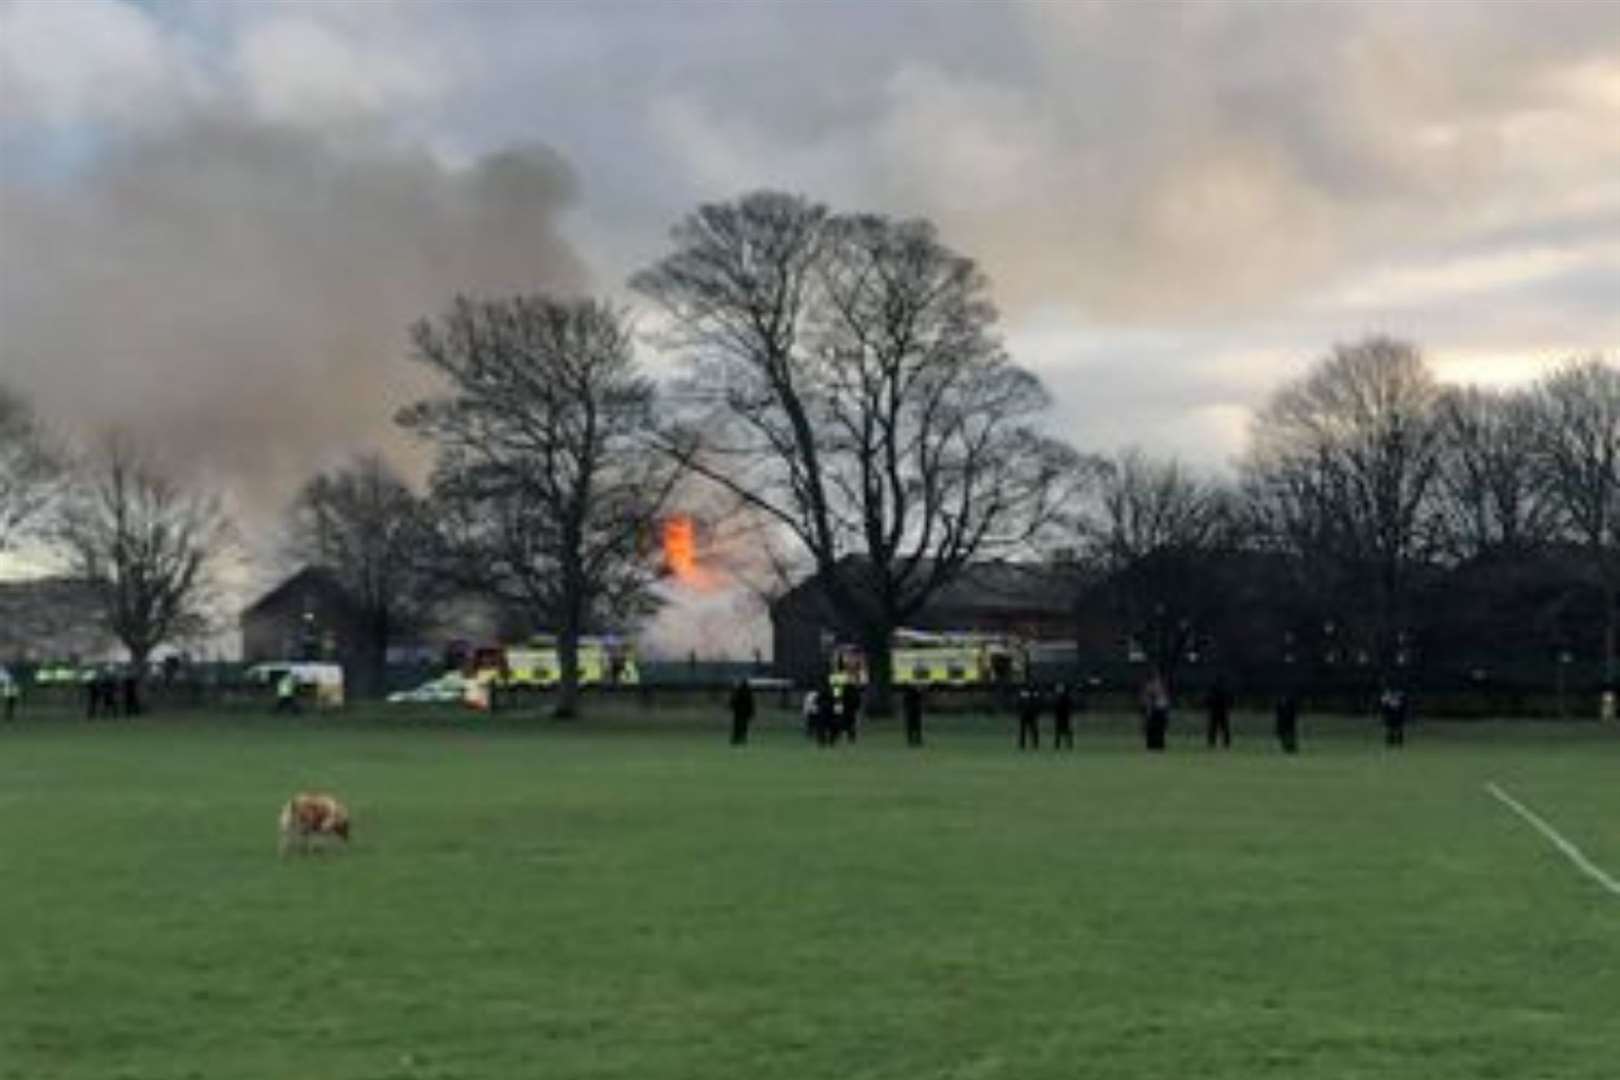 Flames and smoke could be seen at the barracks during the fire